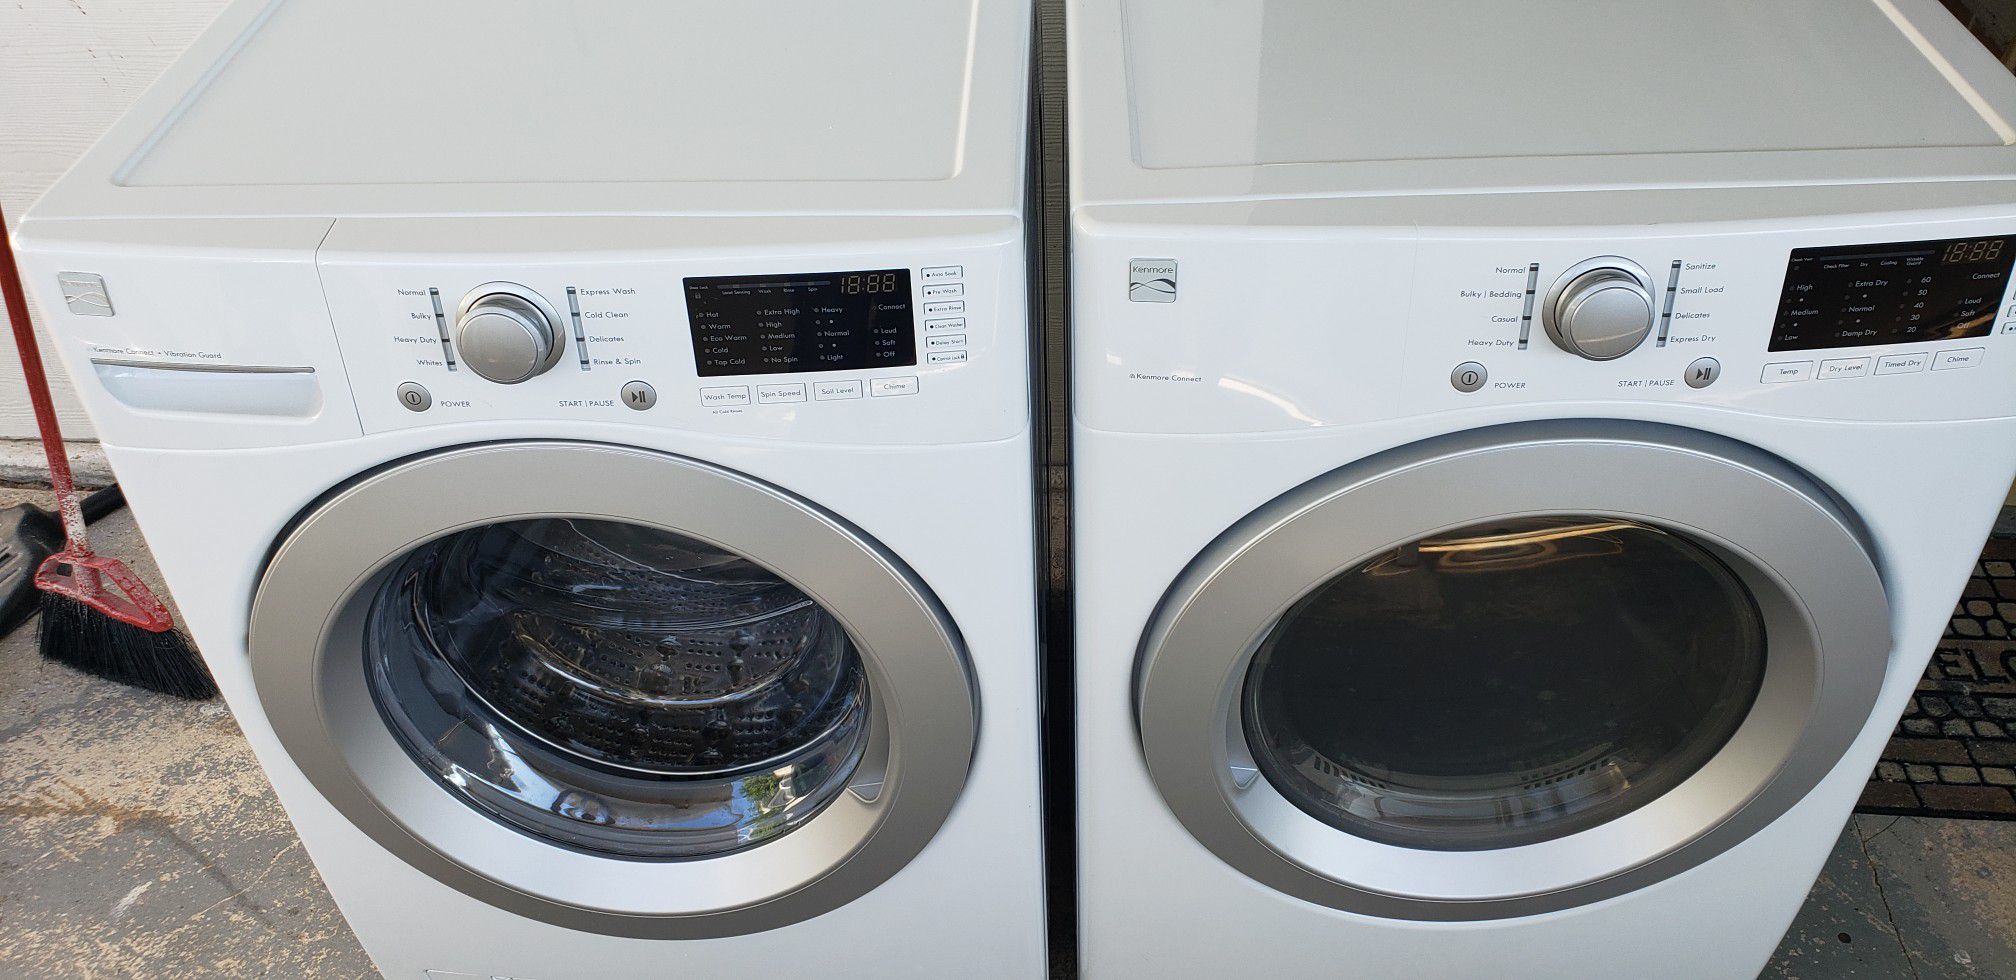 Kenmore washers and Dryer